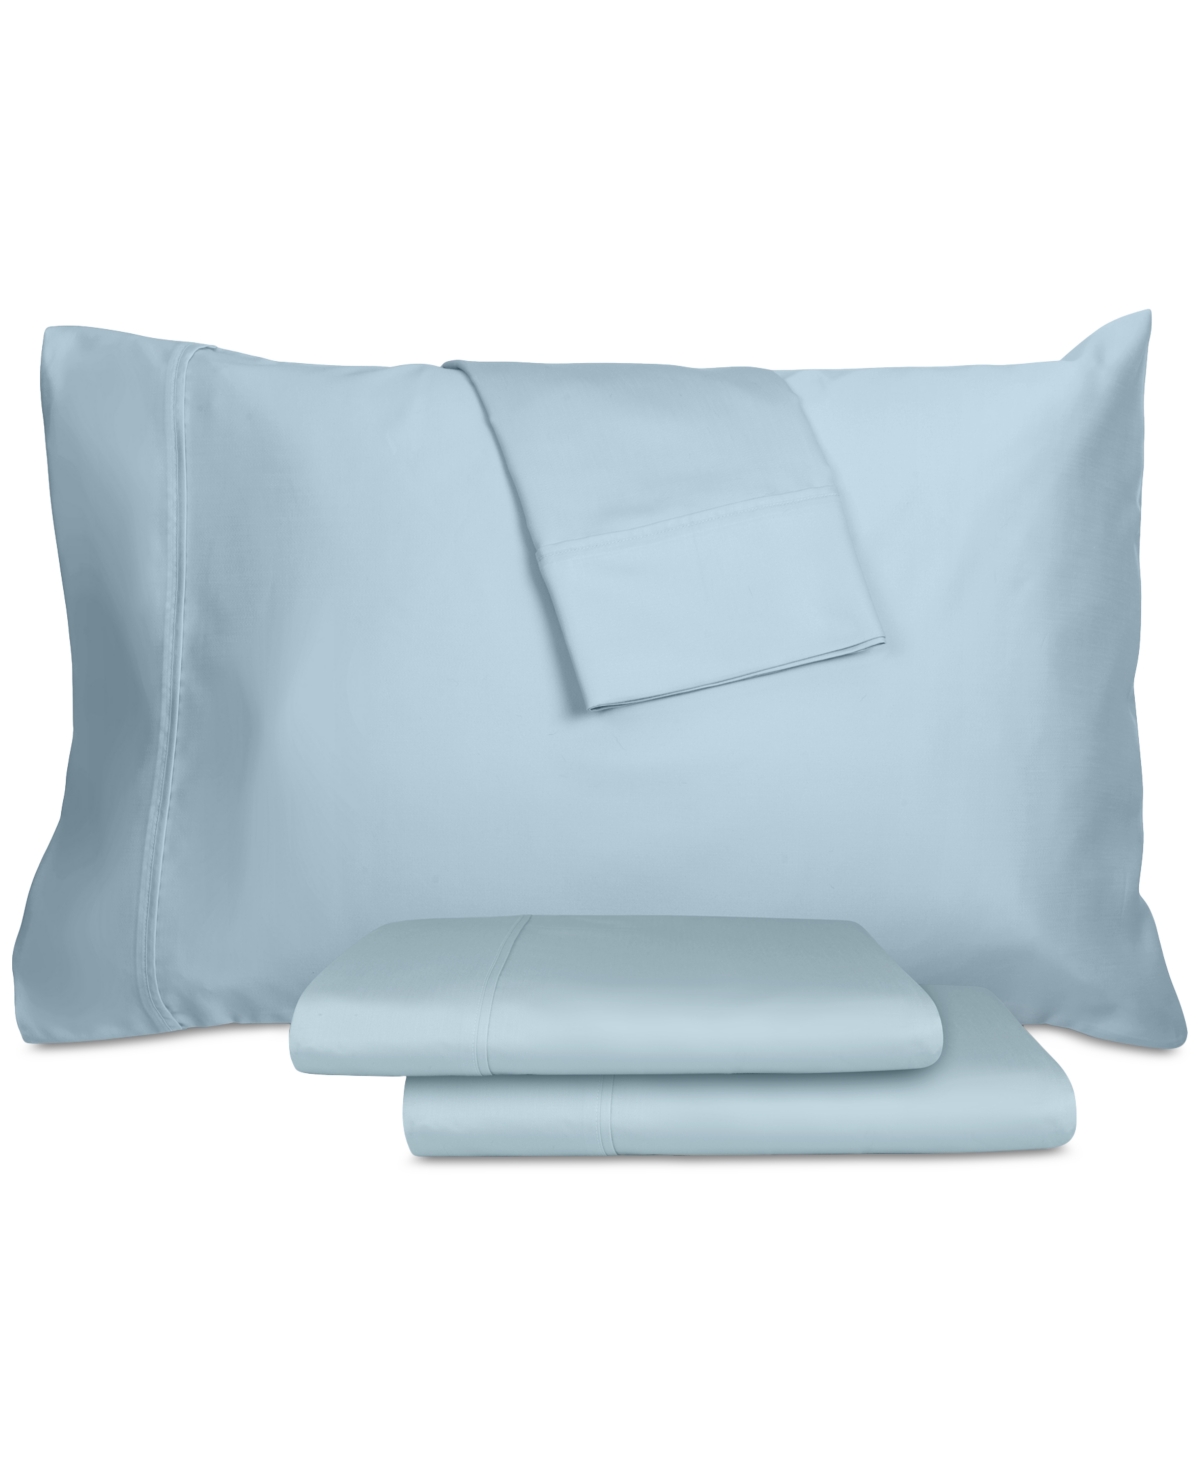 Aq Textiles Percale Solid 4-pc. Sheet Set, Queen In Lt. Blue